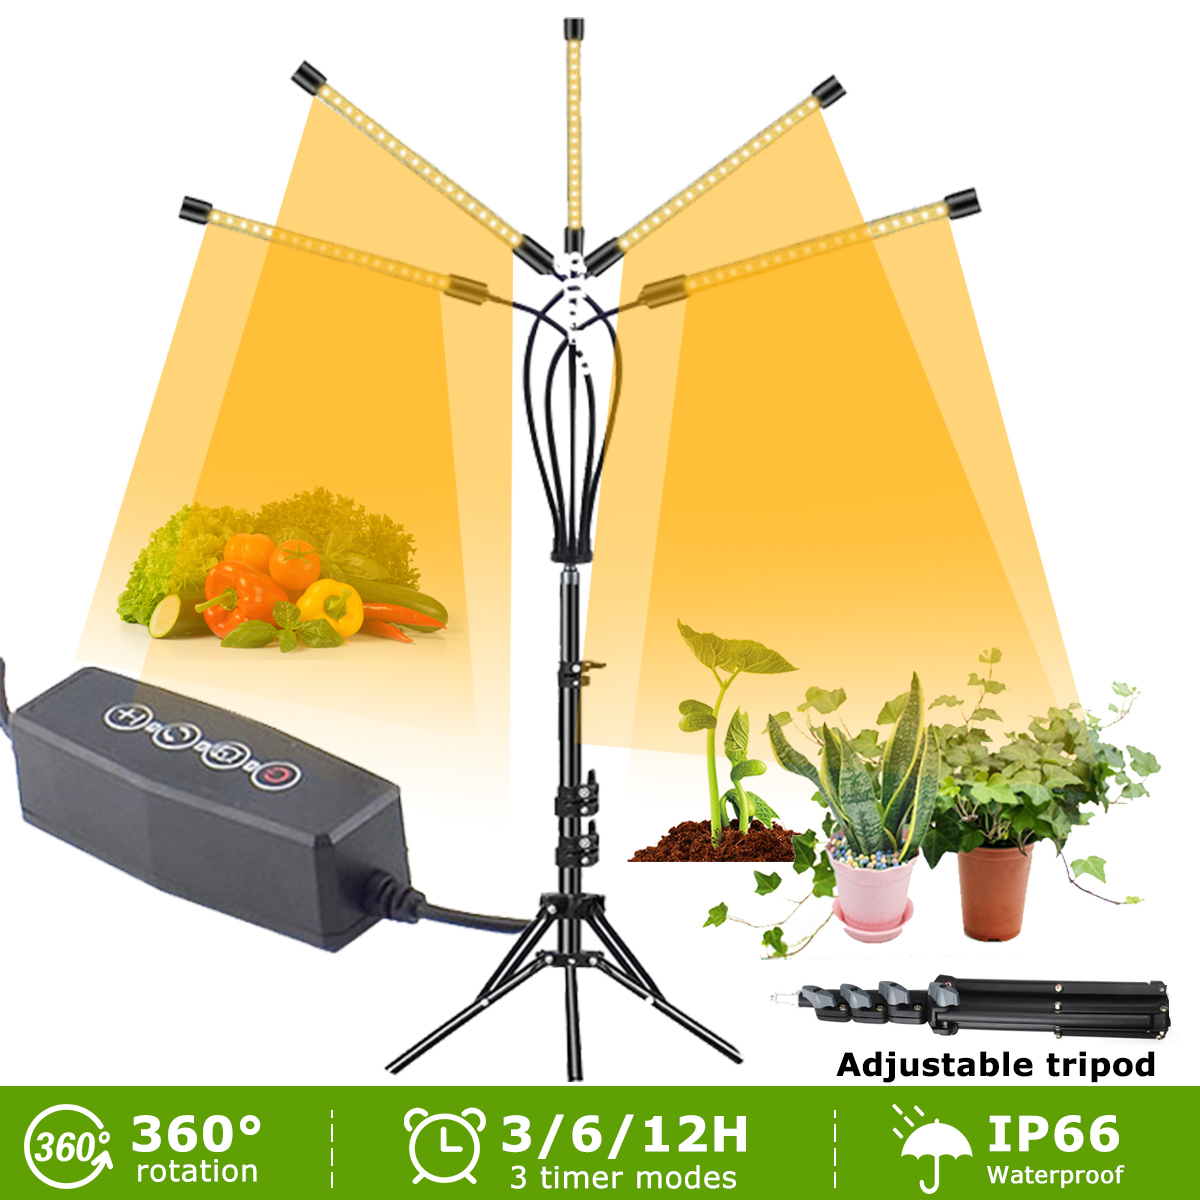 5-Hesds-LED-Grow-Light-Plant-Growing-Lamp-Lights-With-Tripod-For-Indoor-Plants-1836991-1